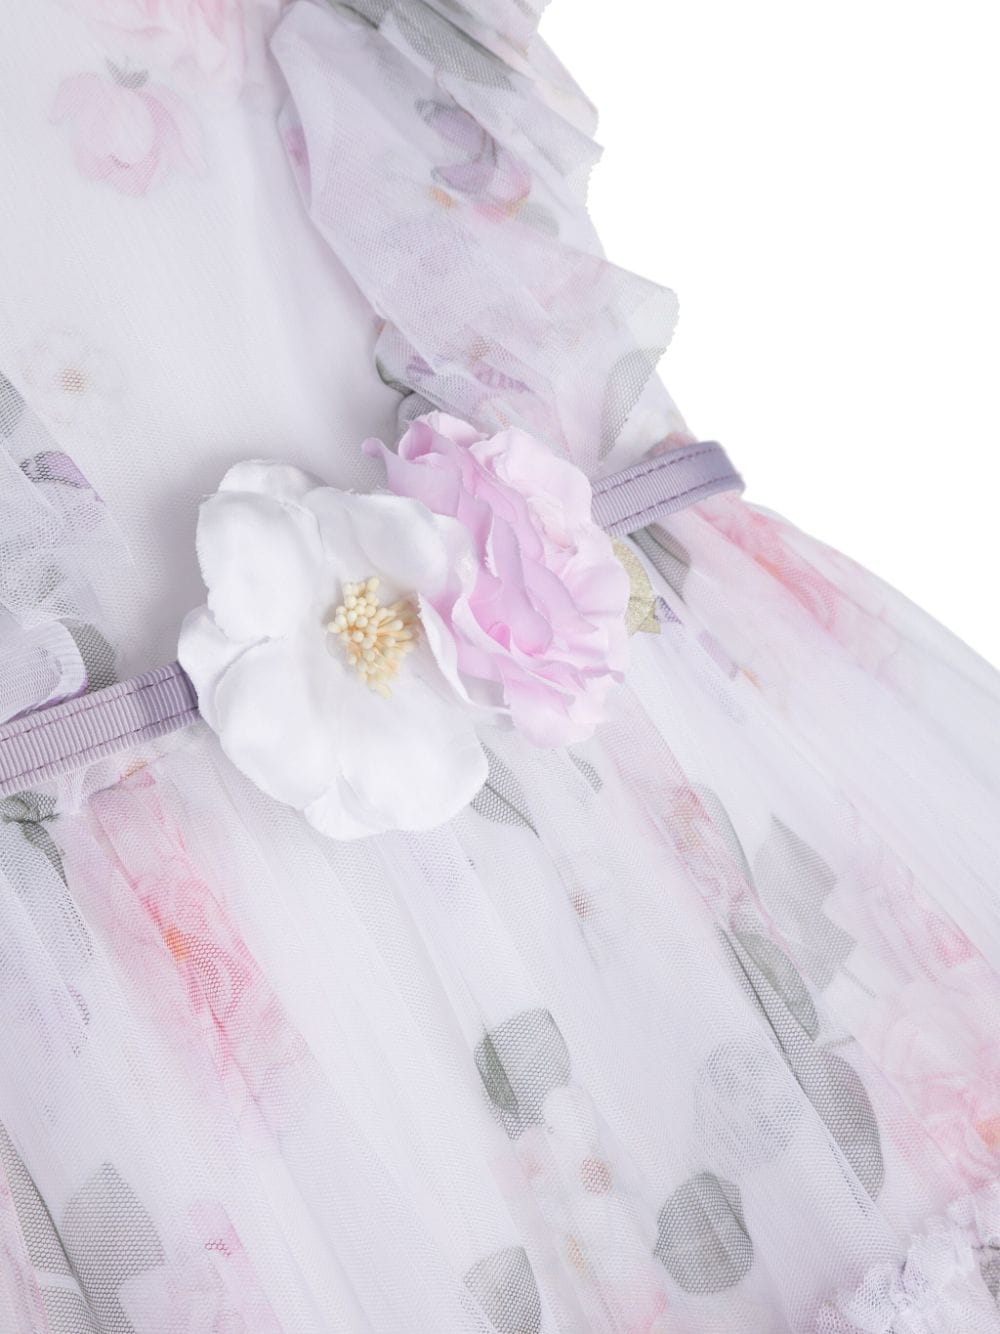 Floral tulle dress